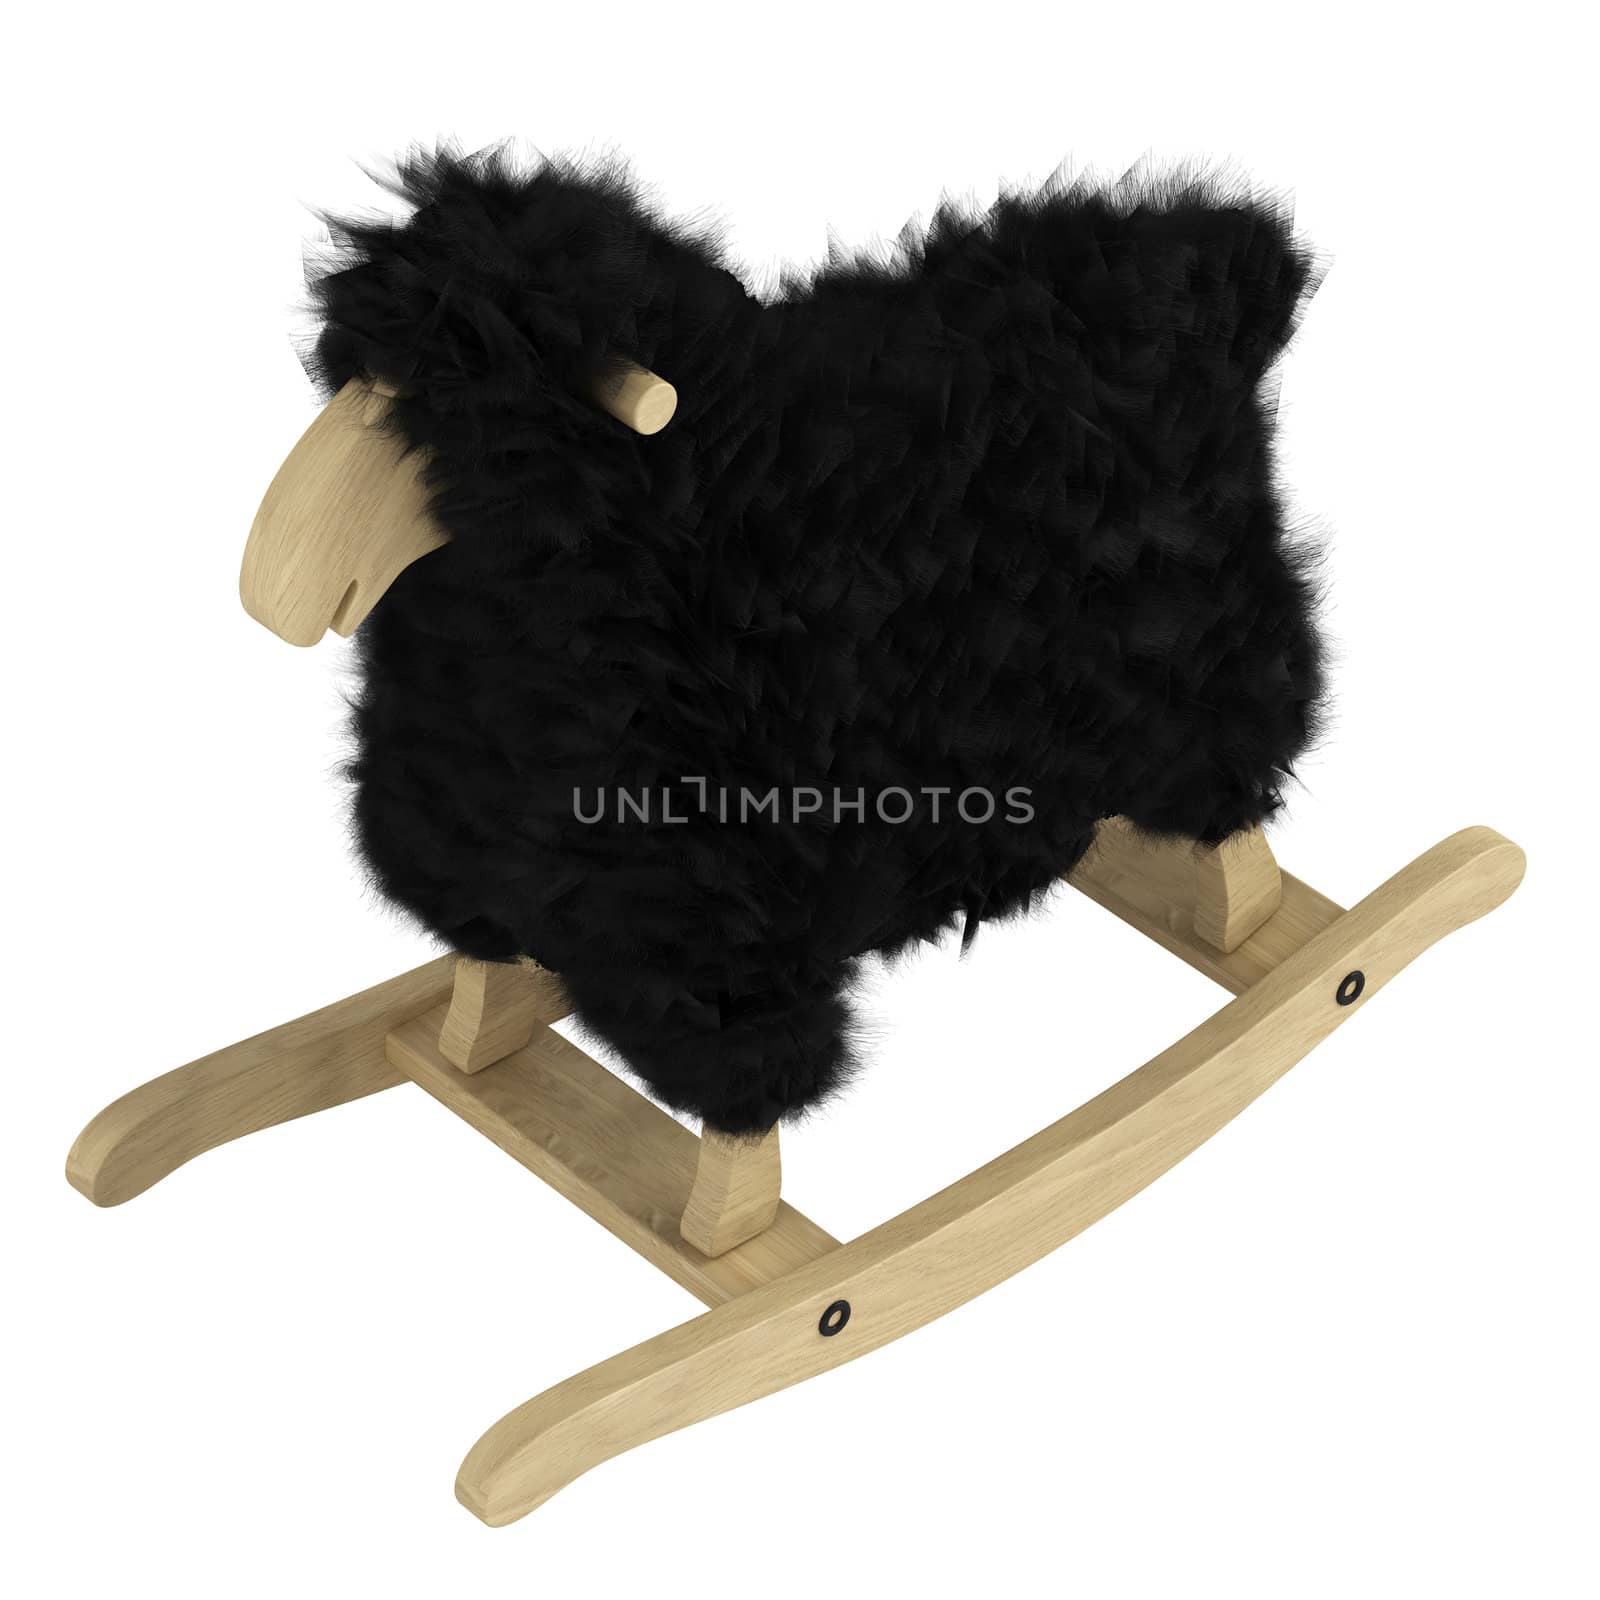 Cute wooden toy on rockers in the shape of a woolly sheep with black fleece isolated on a white background